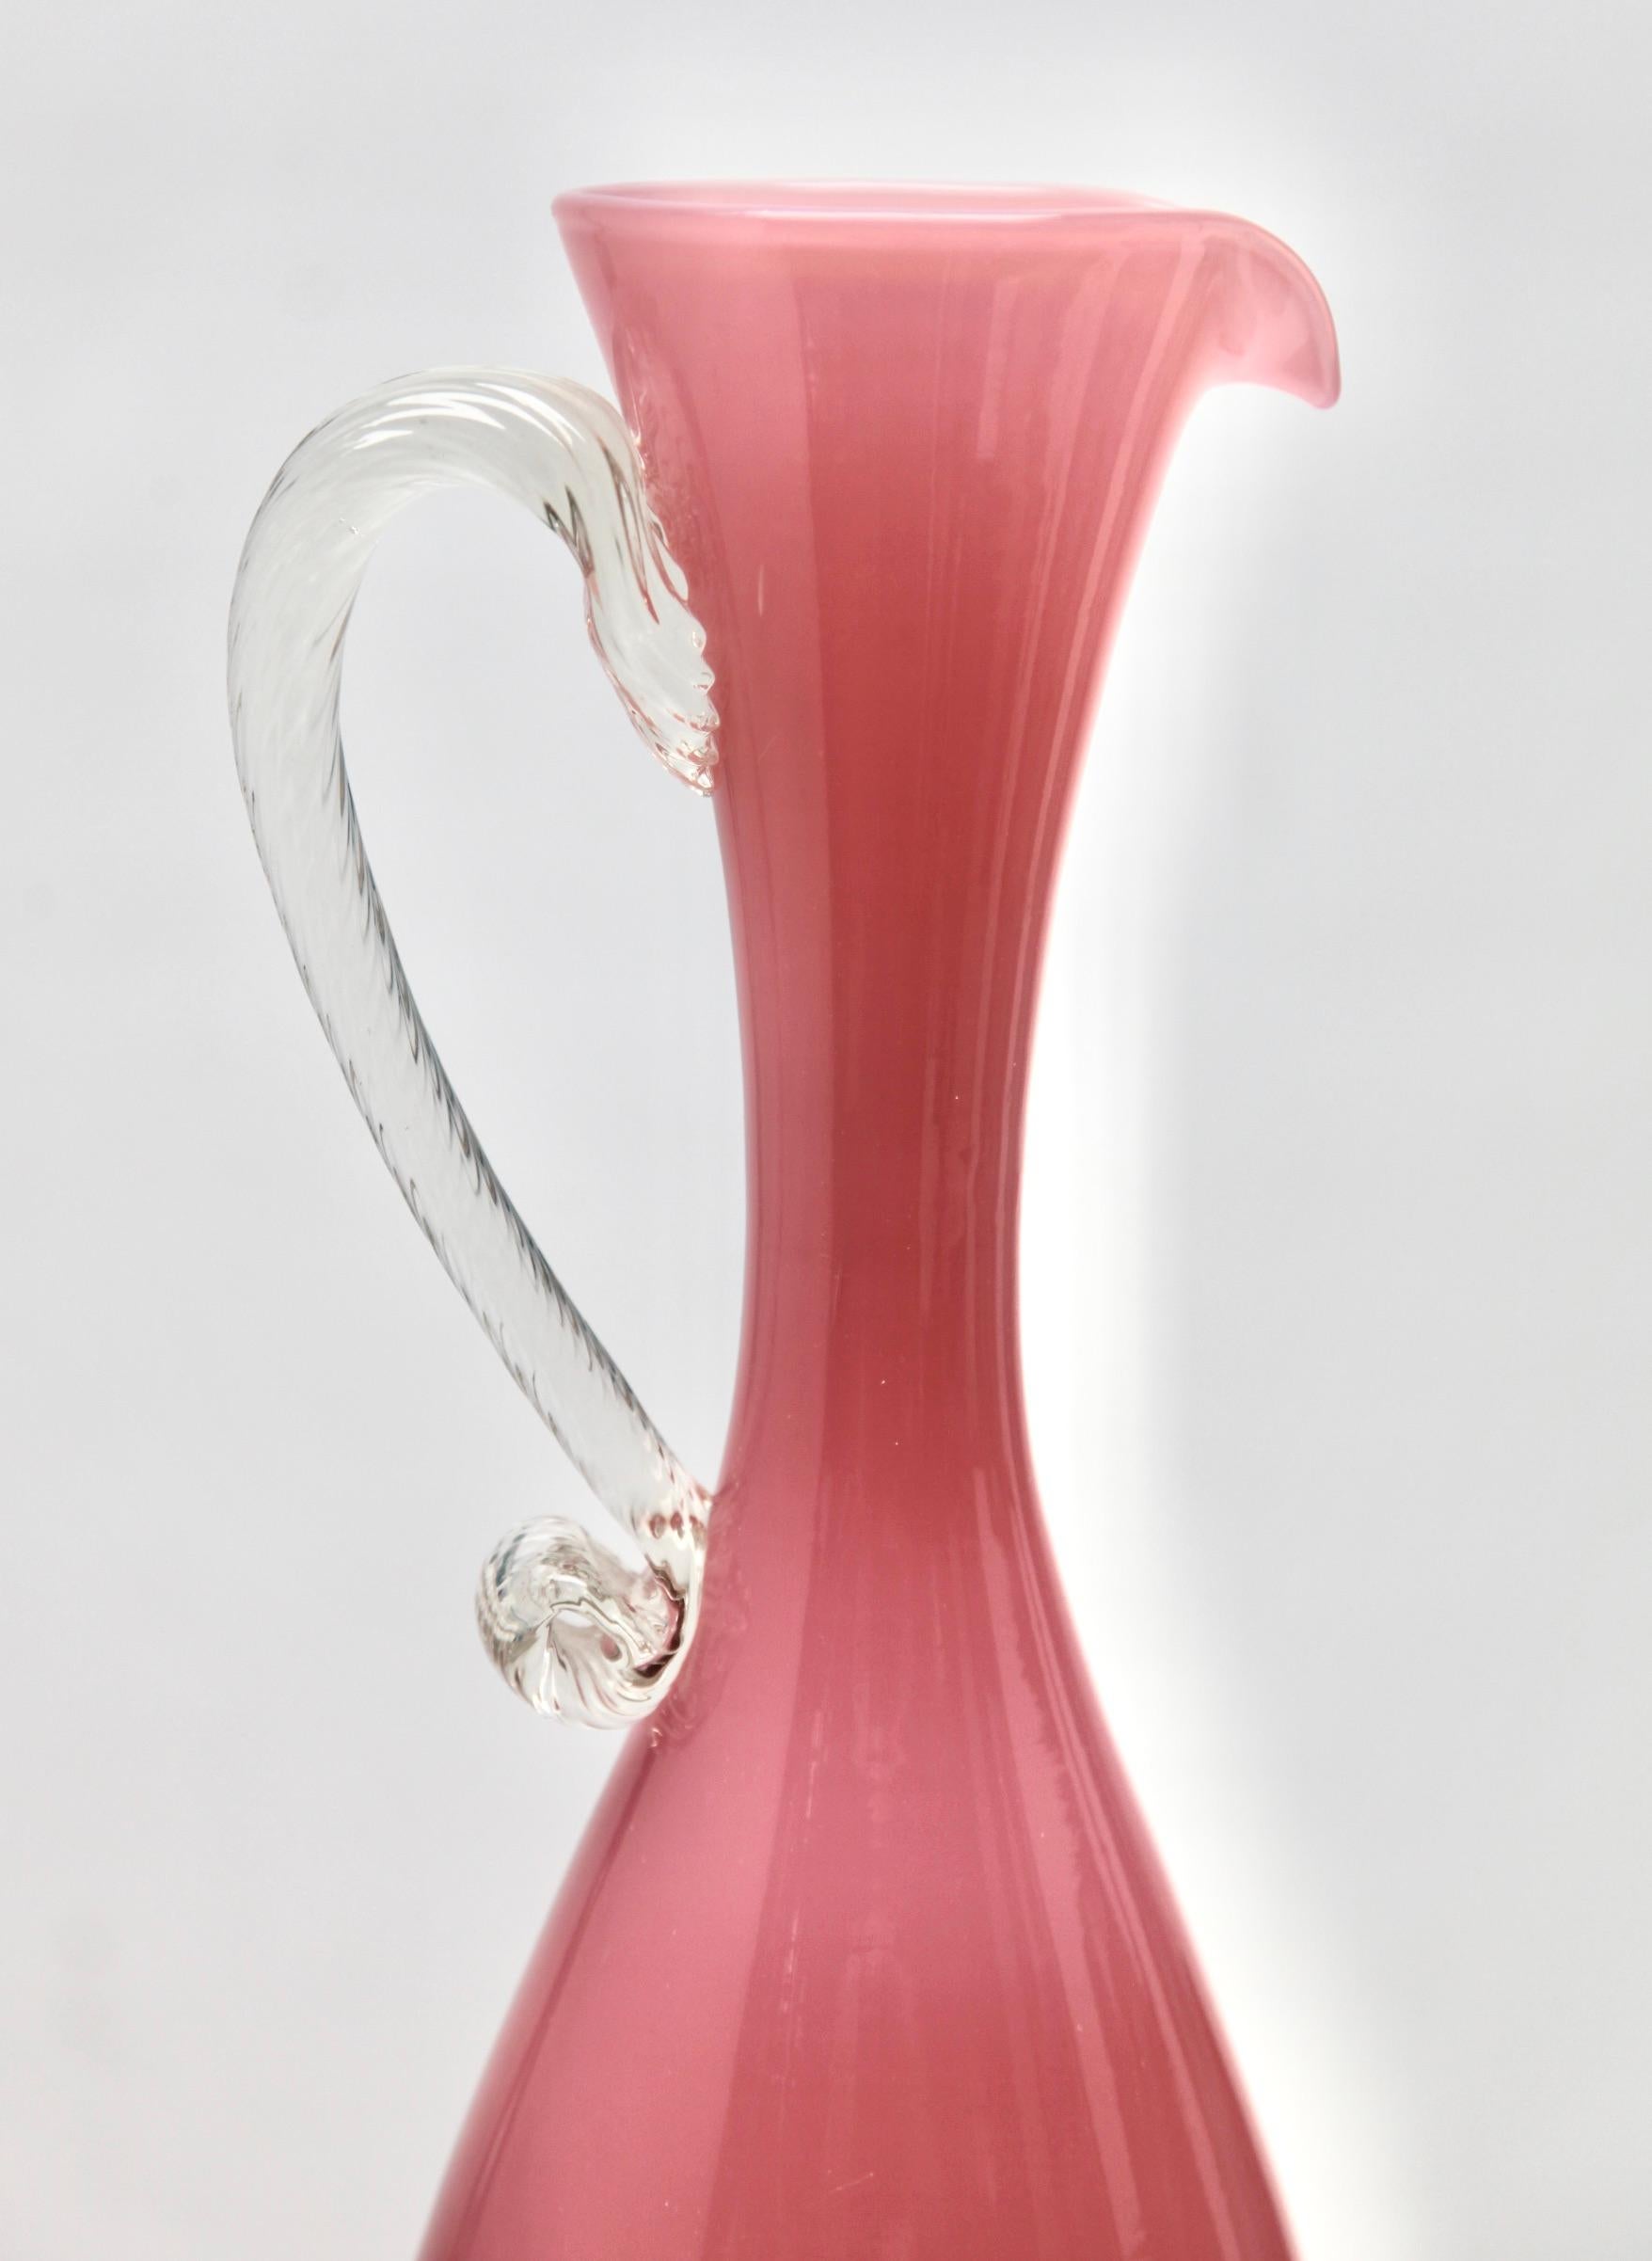 Mid-Century Modern Opalescent Italian Opaline Pitcher from Florence For Sale